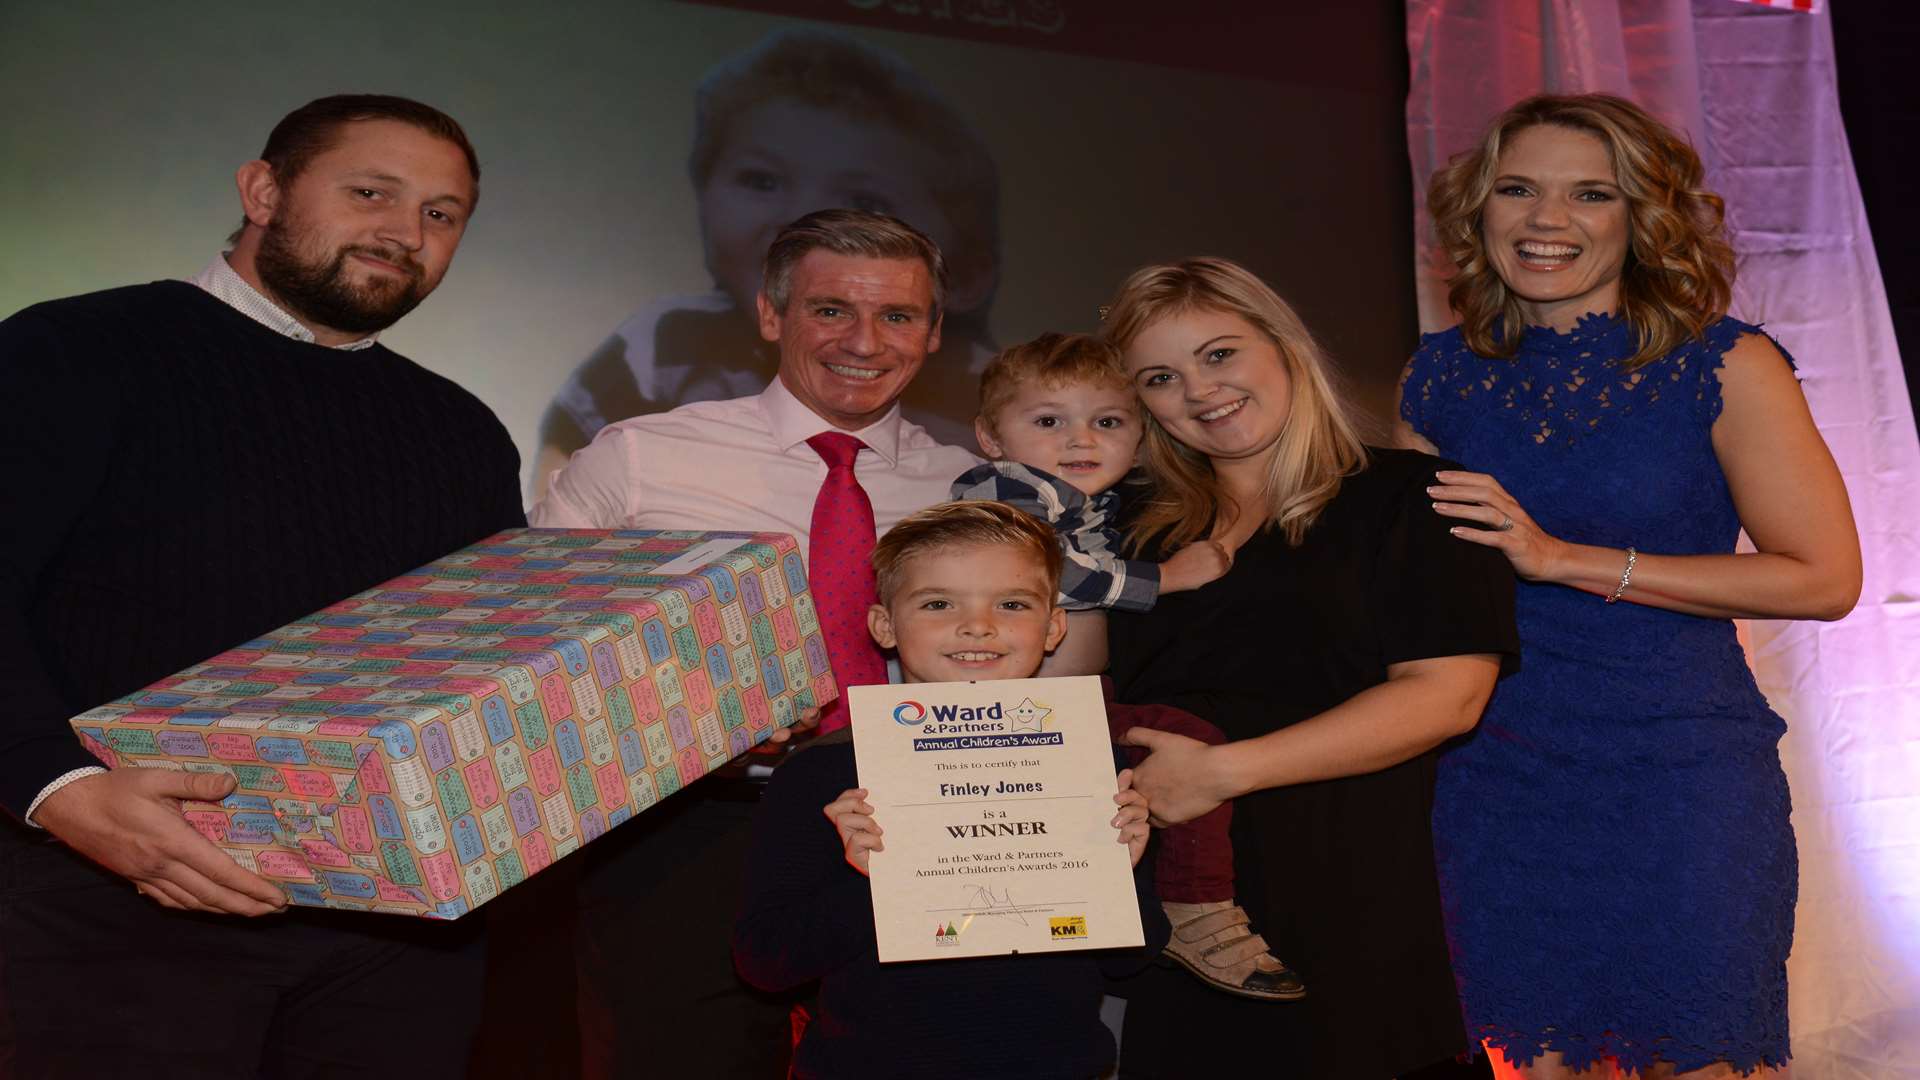 Charlotte Hawkins and financial direcor Keith Lovell present the award for Triumph over Adversity (Up to 5yrs) to Finley Jones and his family